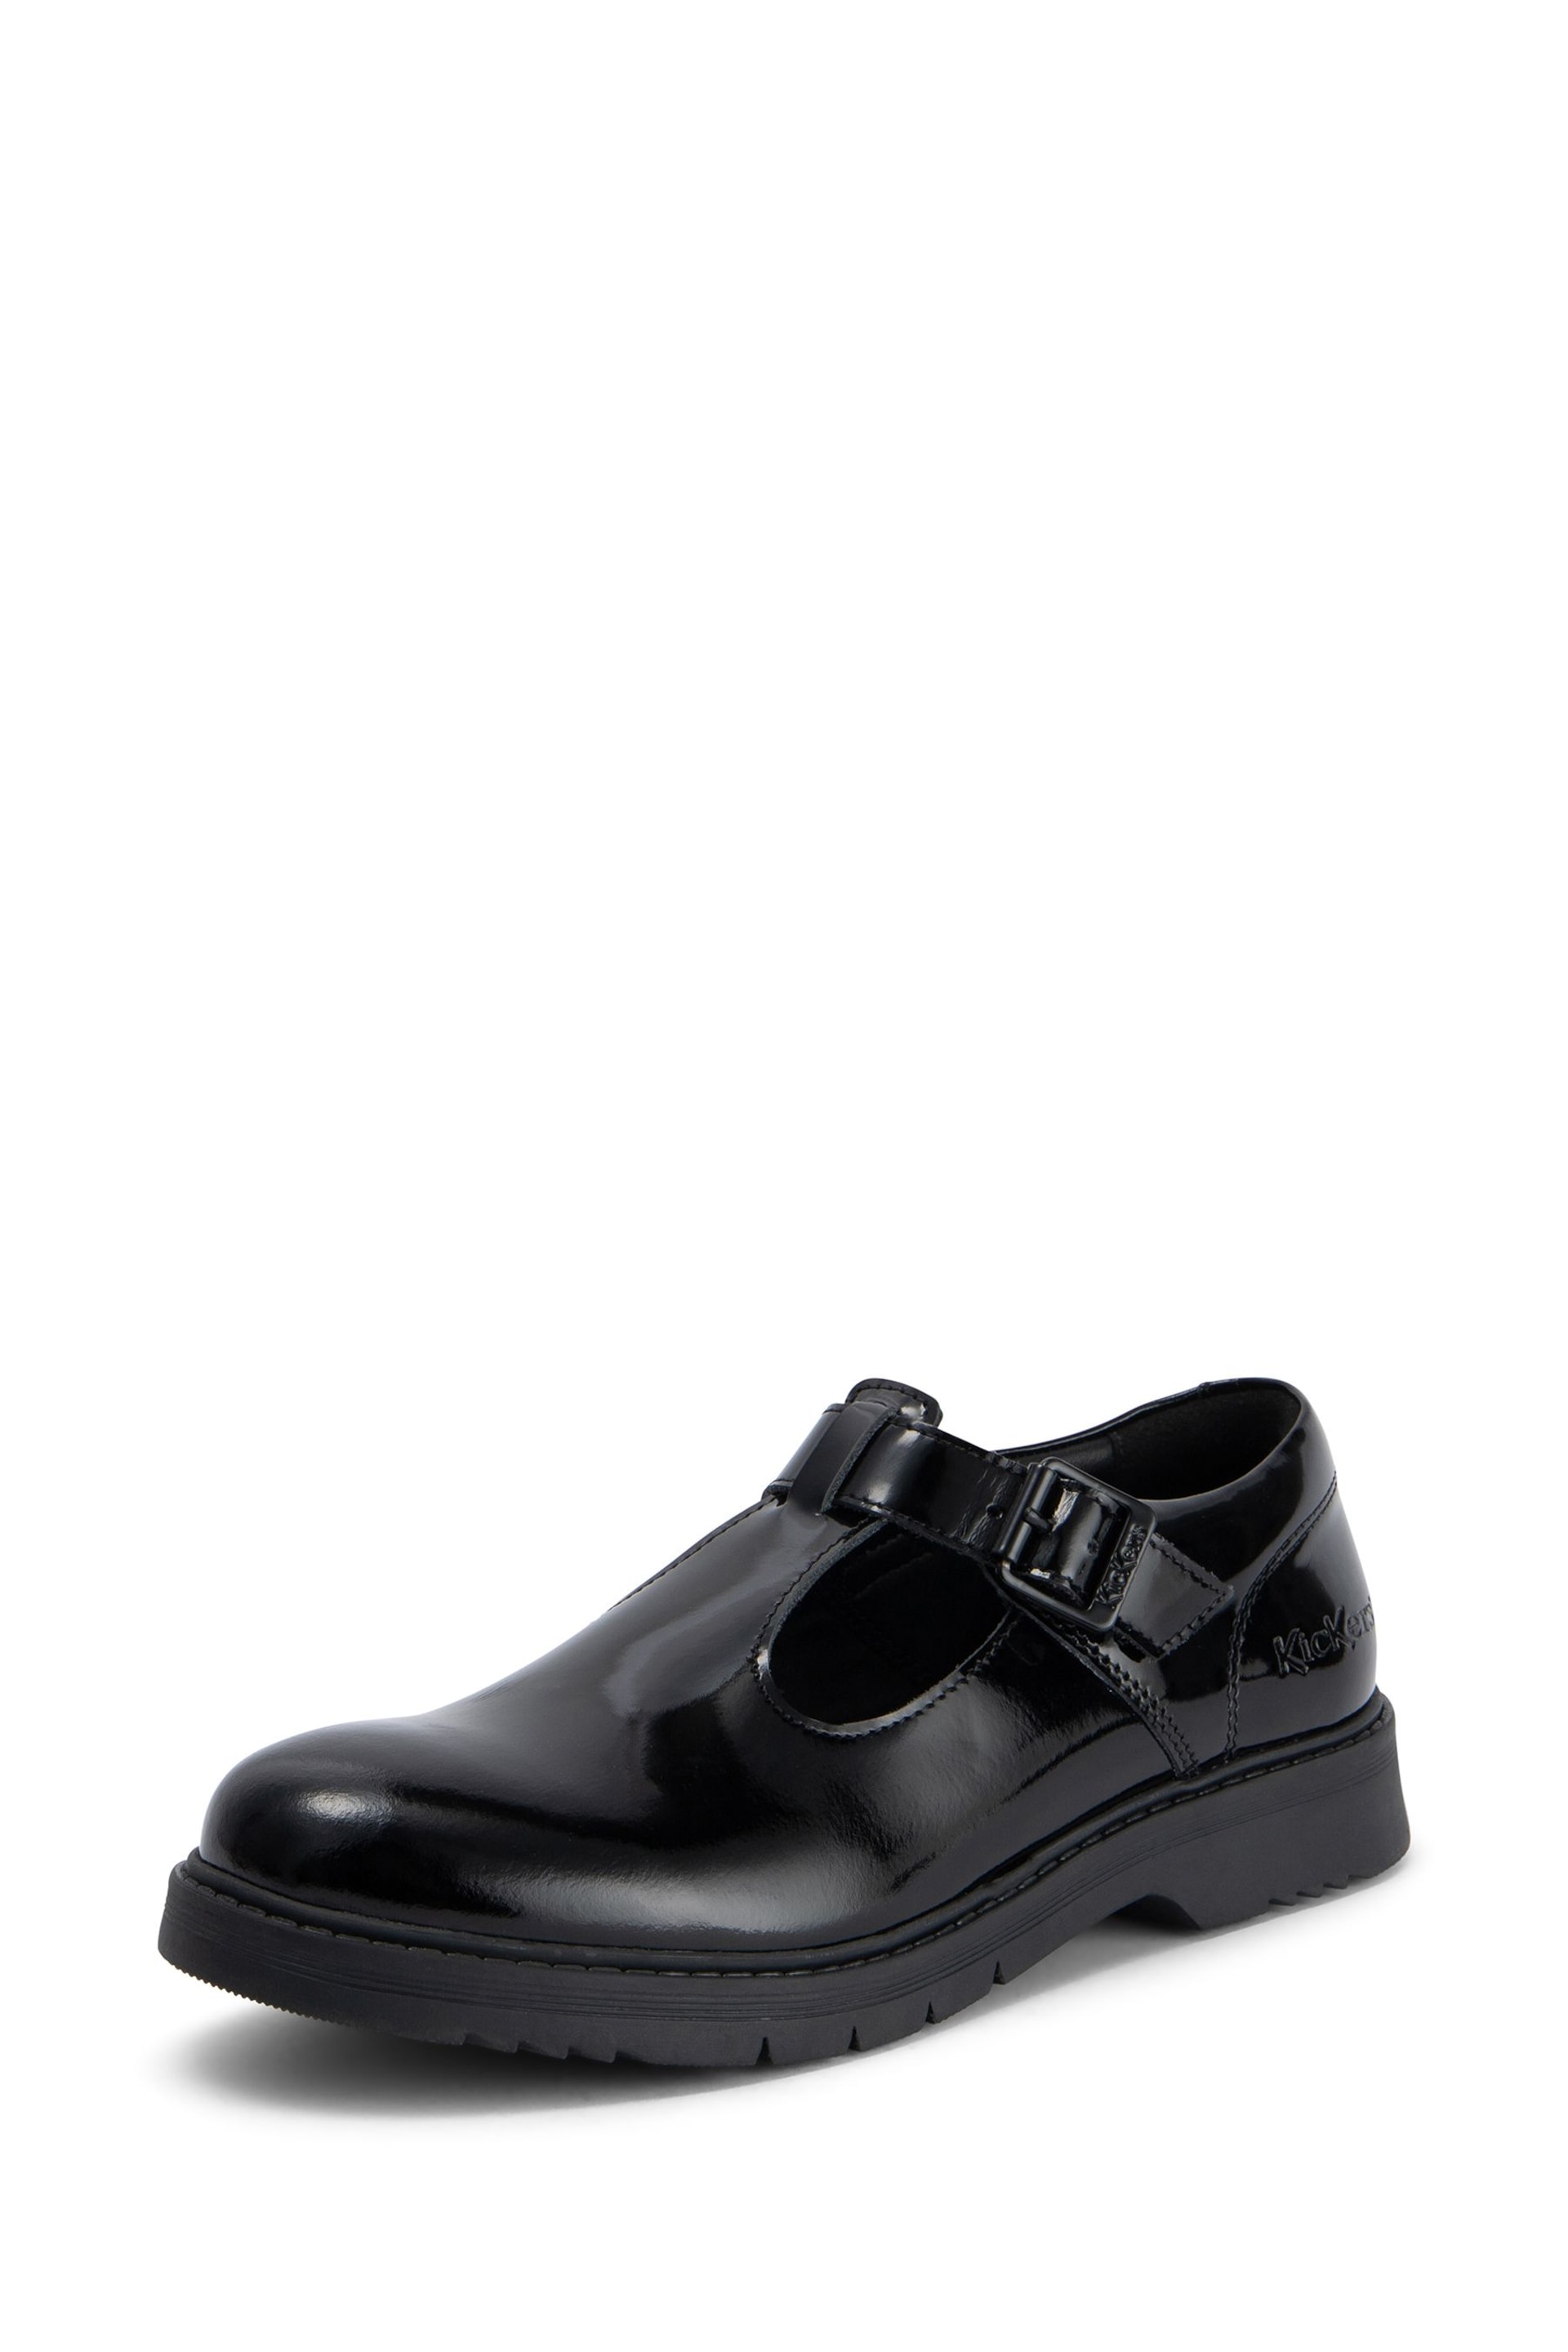 Kickers Youth Girls Finley T-Bar Patent Leather Black Shoes - Image 6 of 6